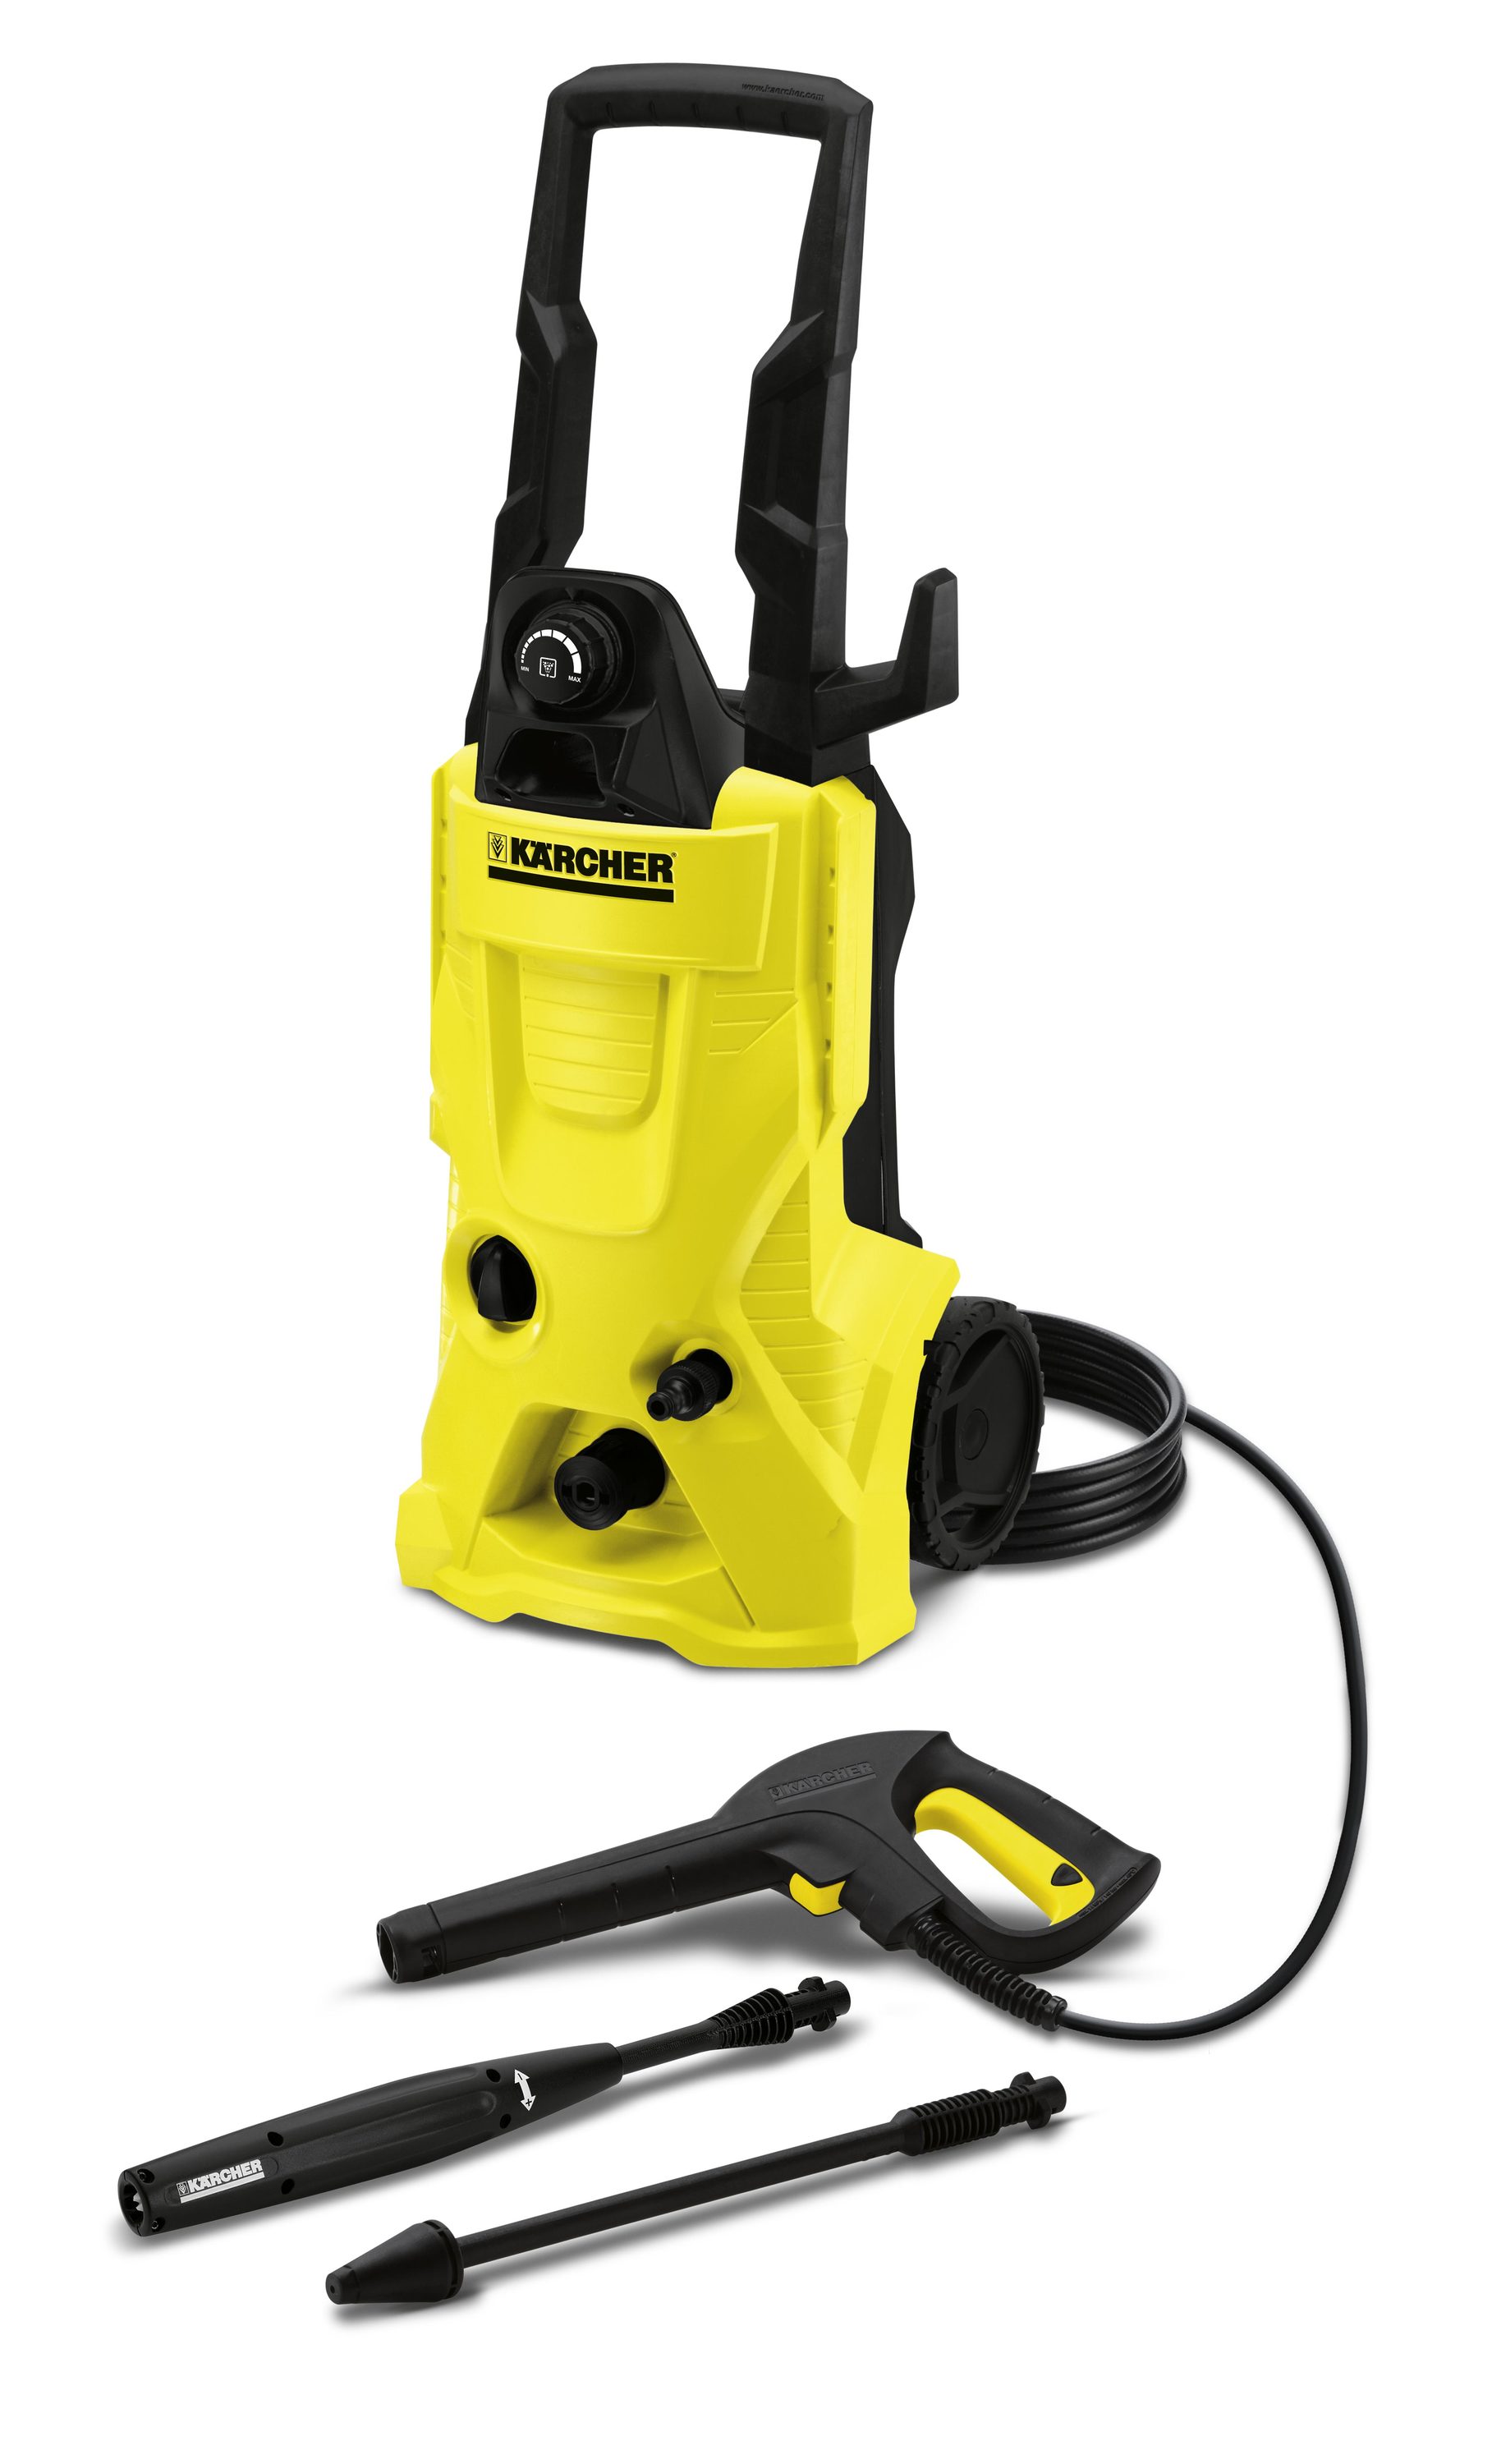 Karcher 1800 PSI (Electric-Cold Water) Pressure Washer w/ Induction Motor